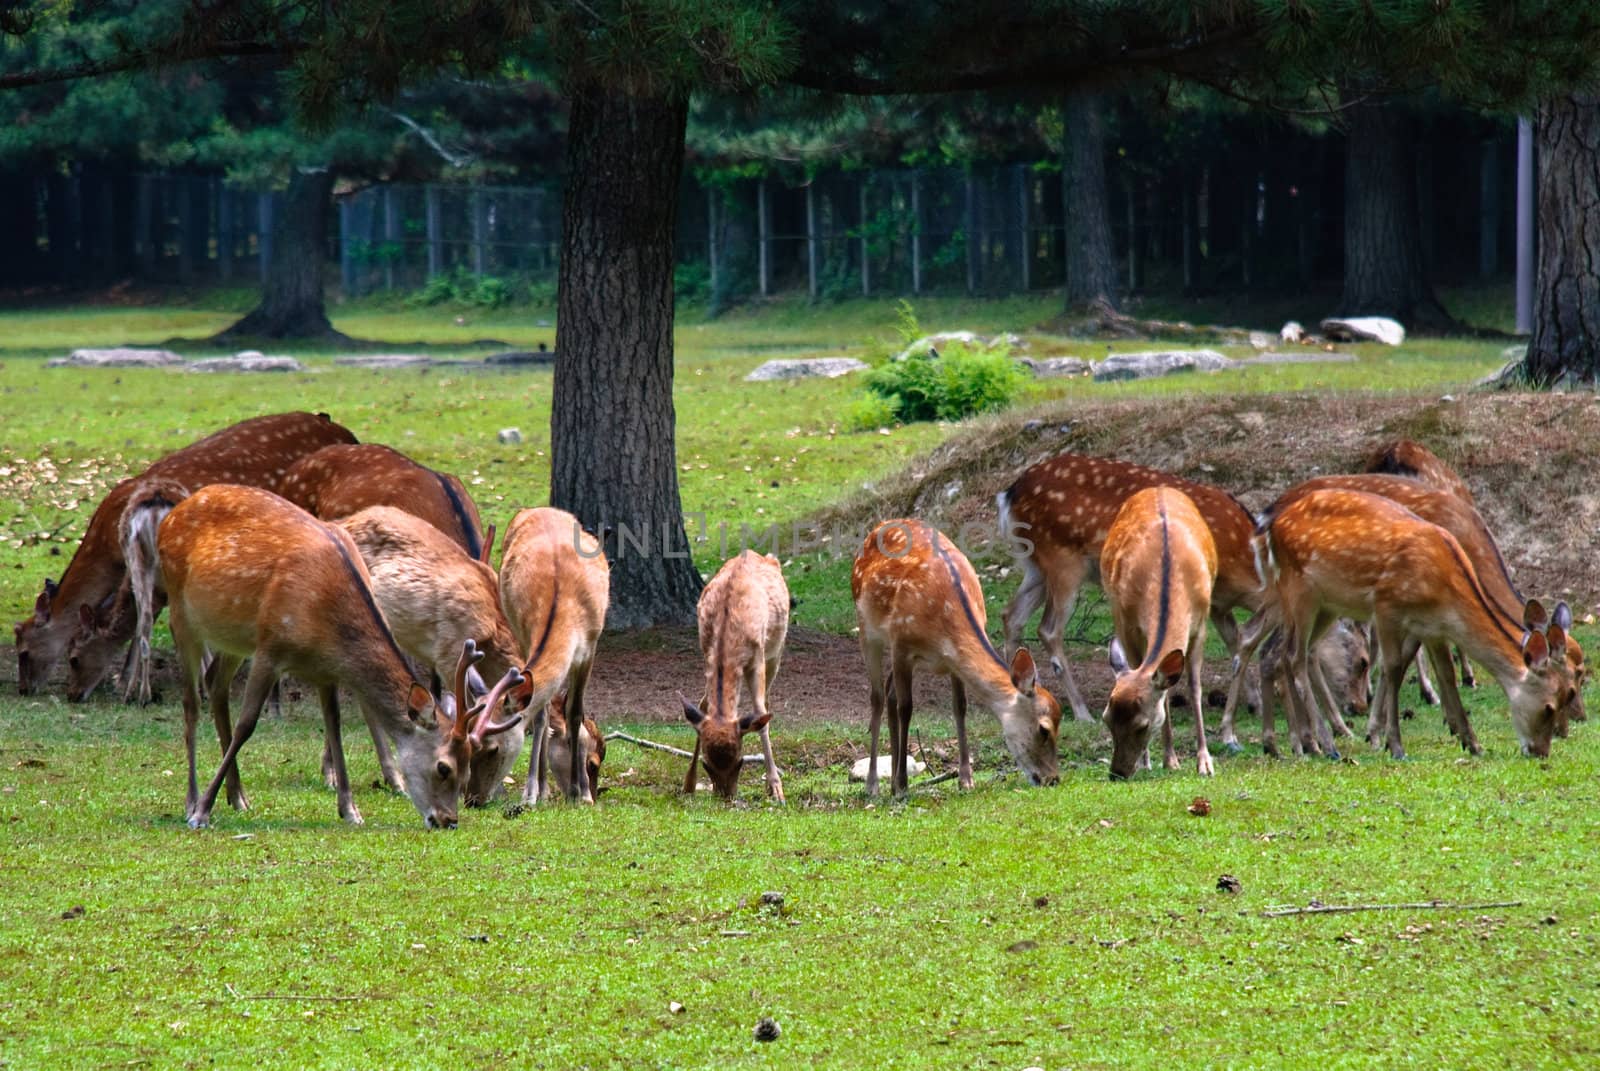 Spotted deers grazing grass in Nara, Japan.